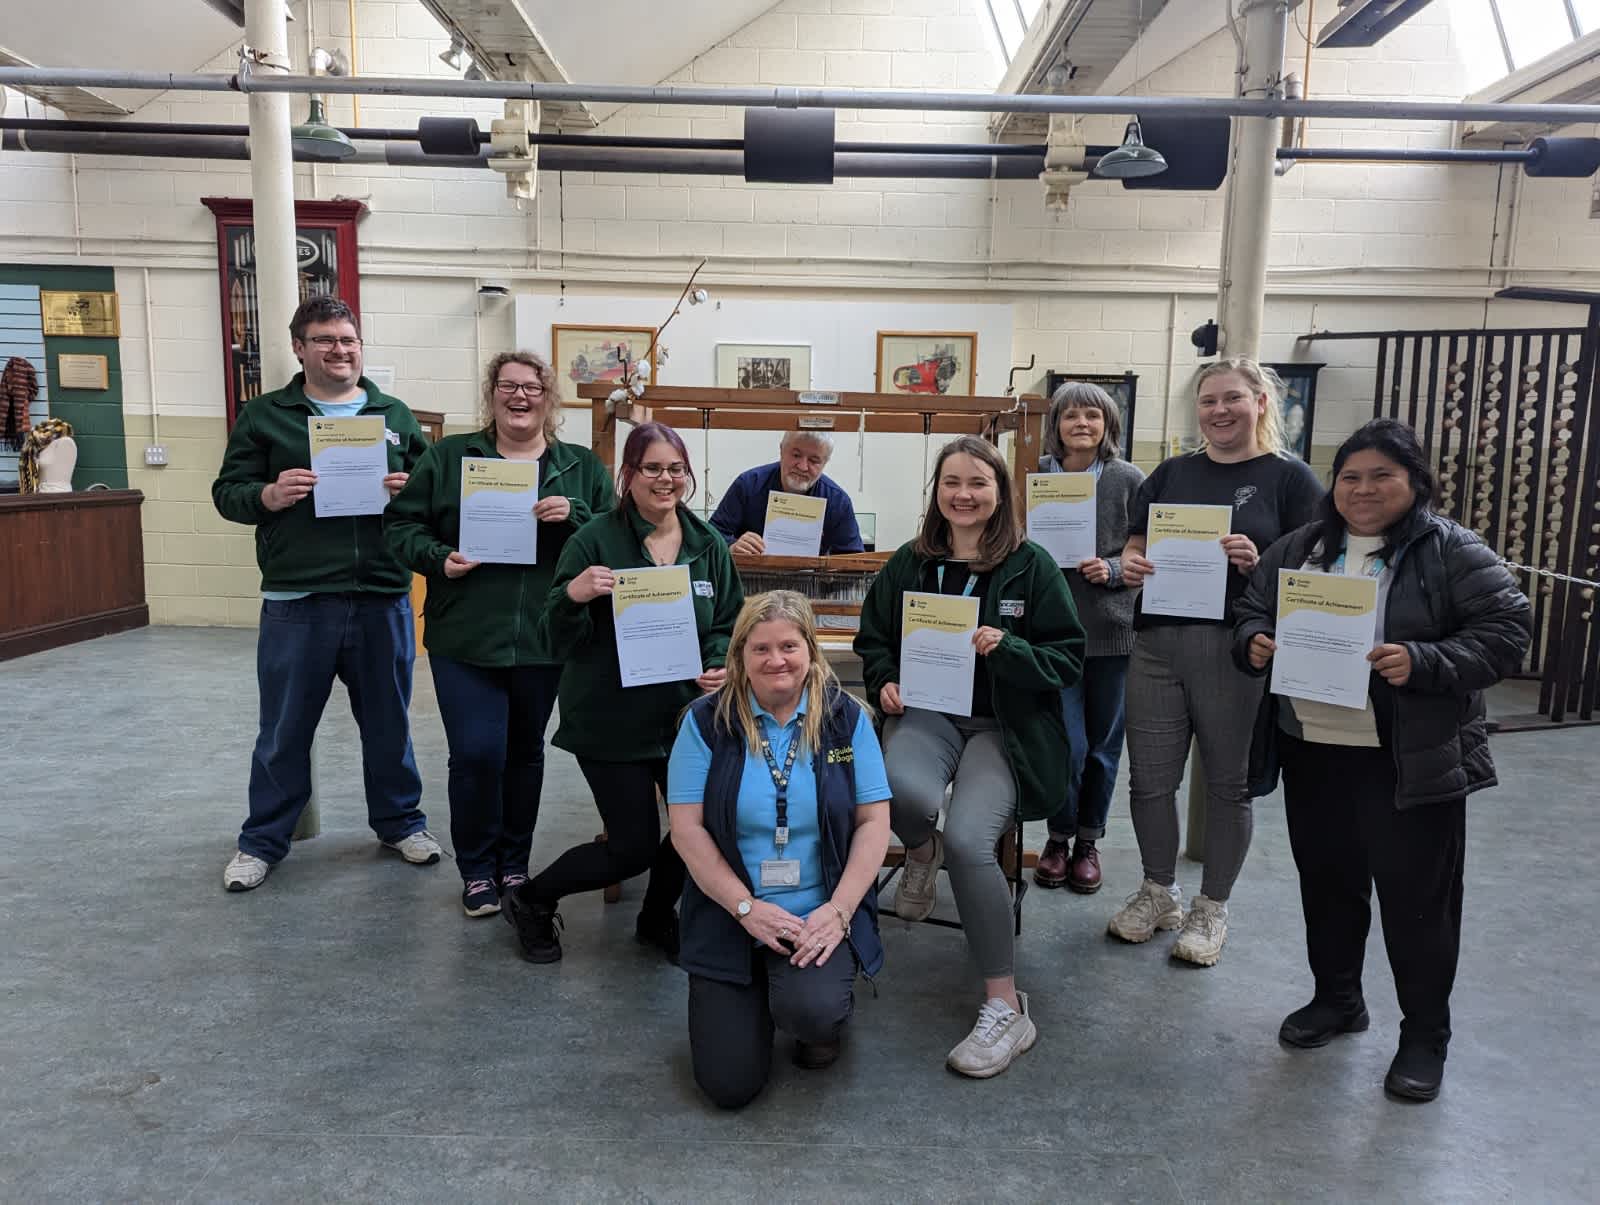 Sharon from Guide Dogs is crouching in front of staff from Queen Street Textile Museum, who are holding up their certificates.